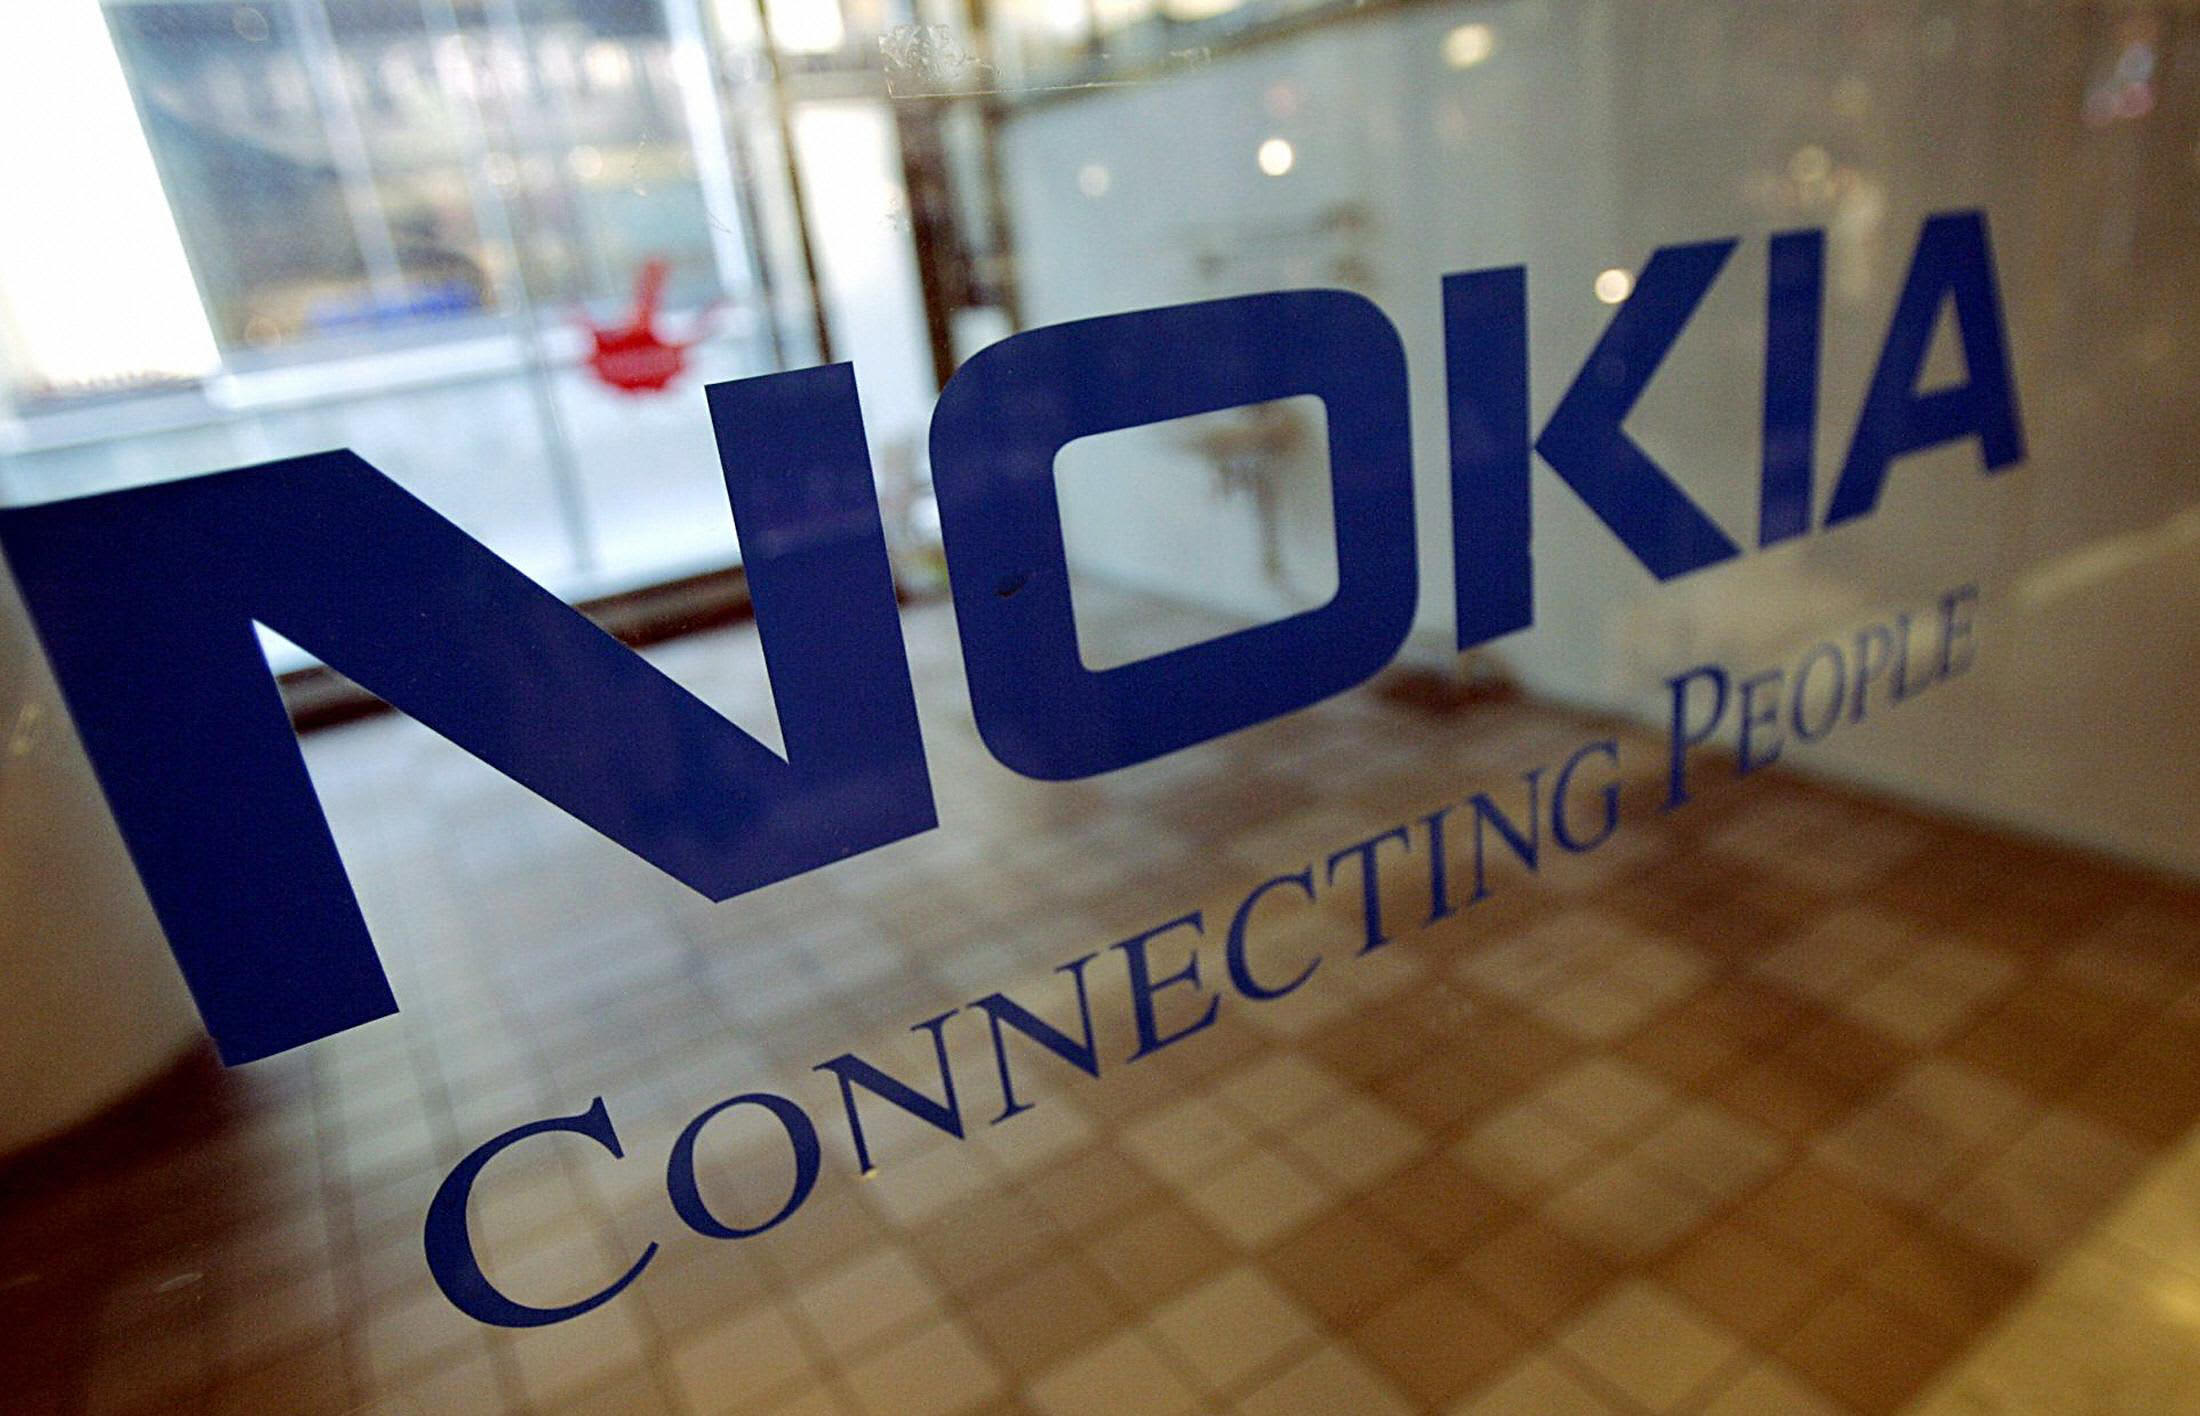 Nokia CEO says the global chip shortage requires ‘constant attention’